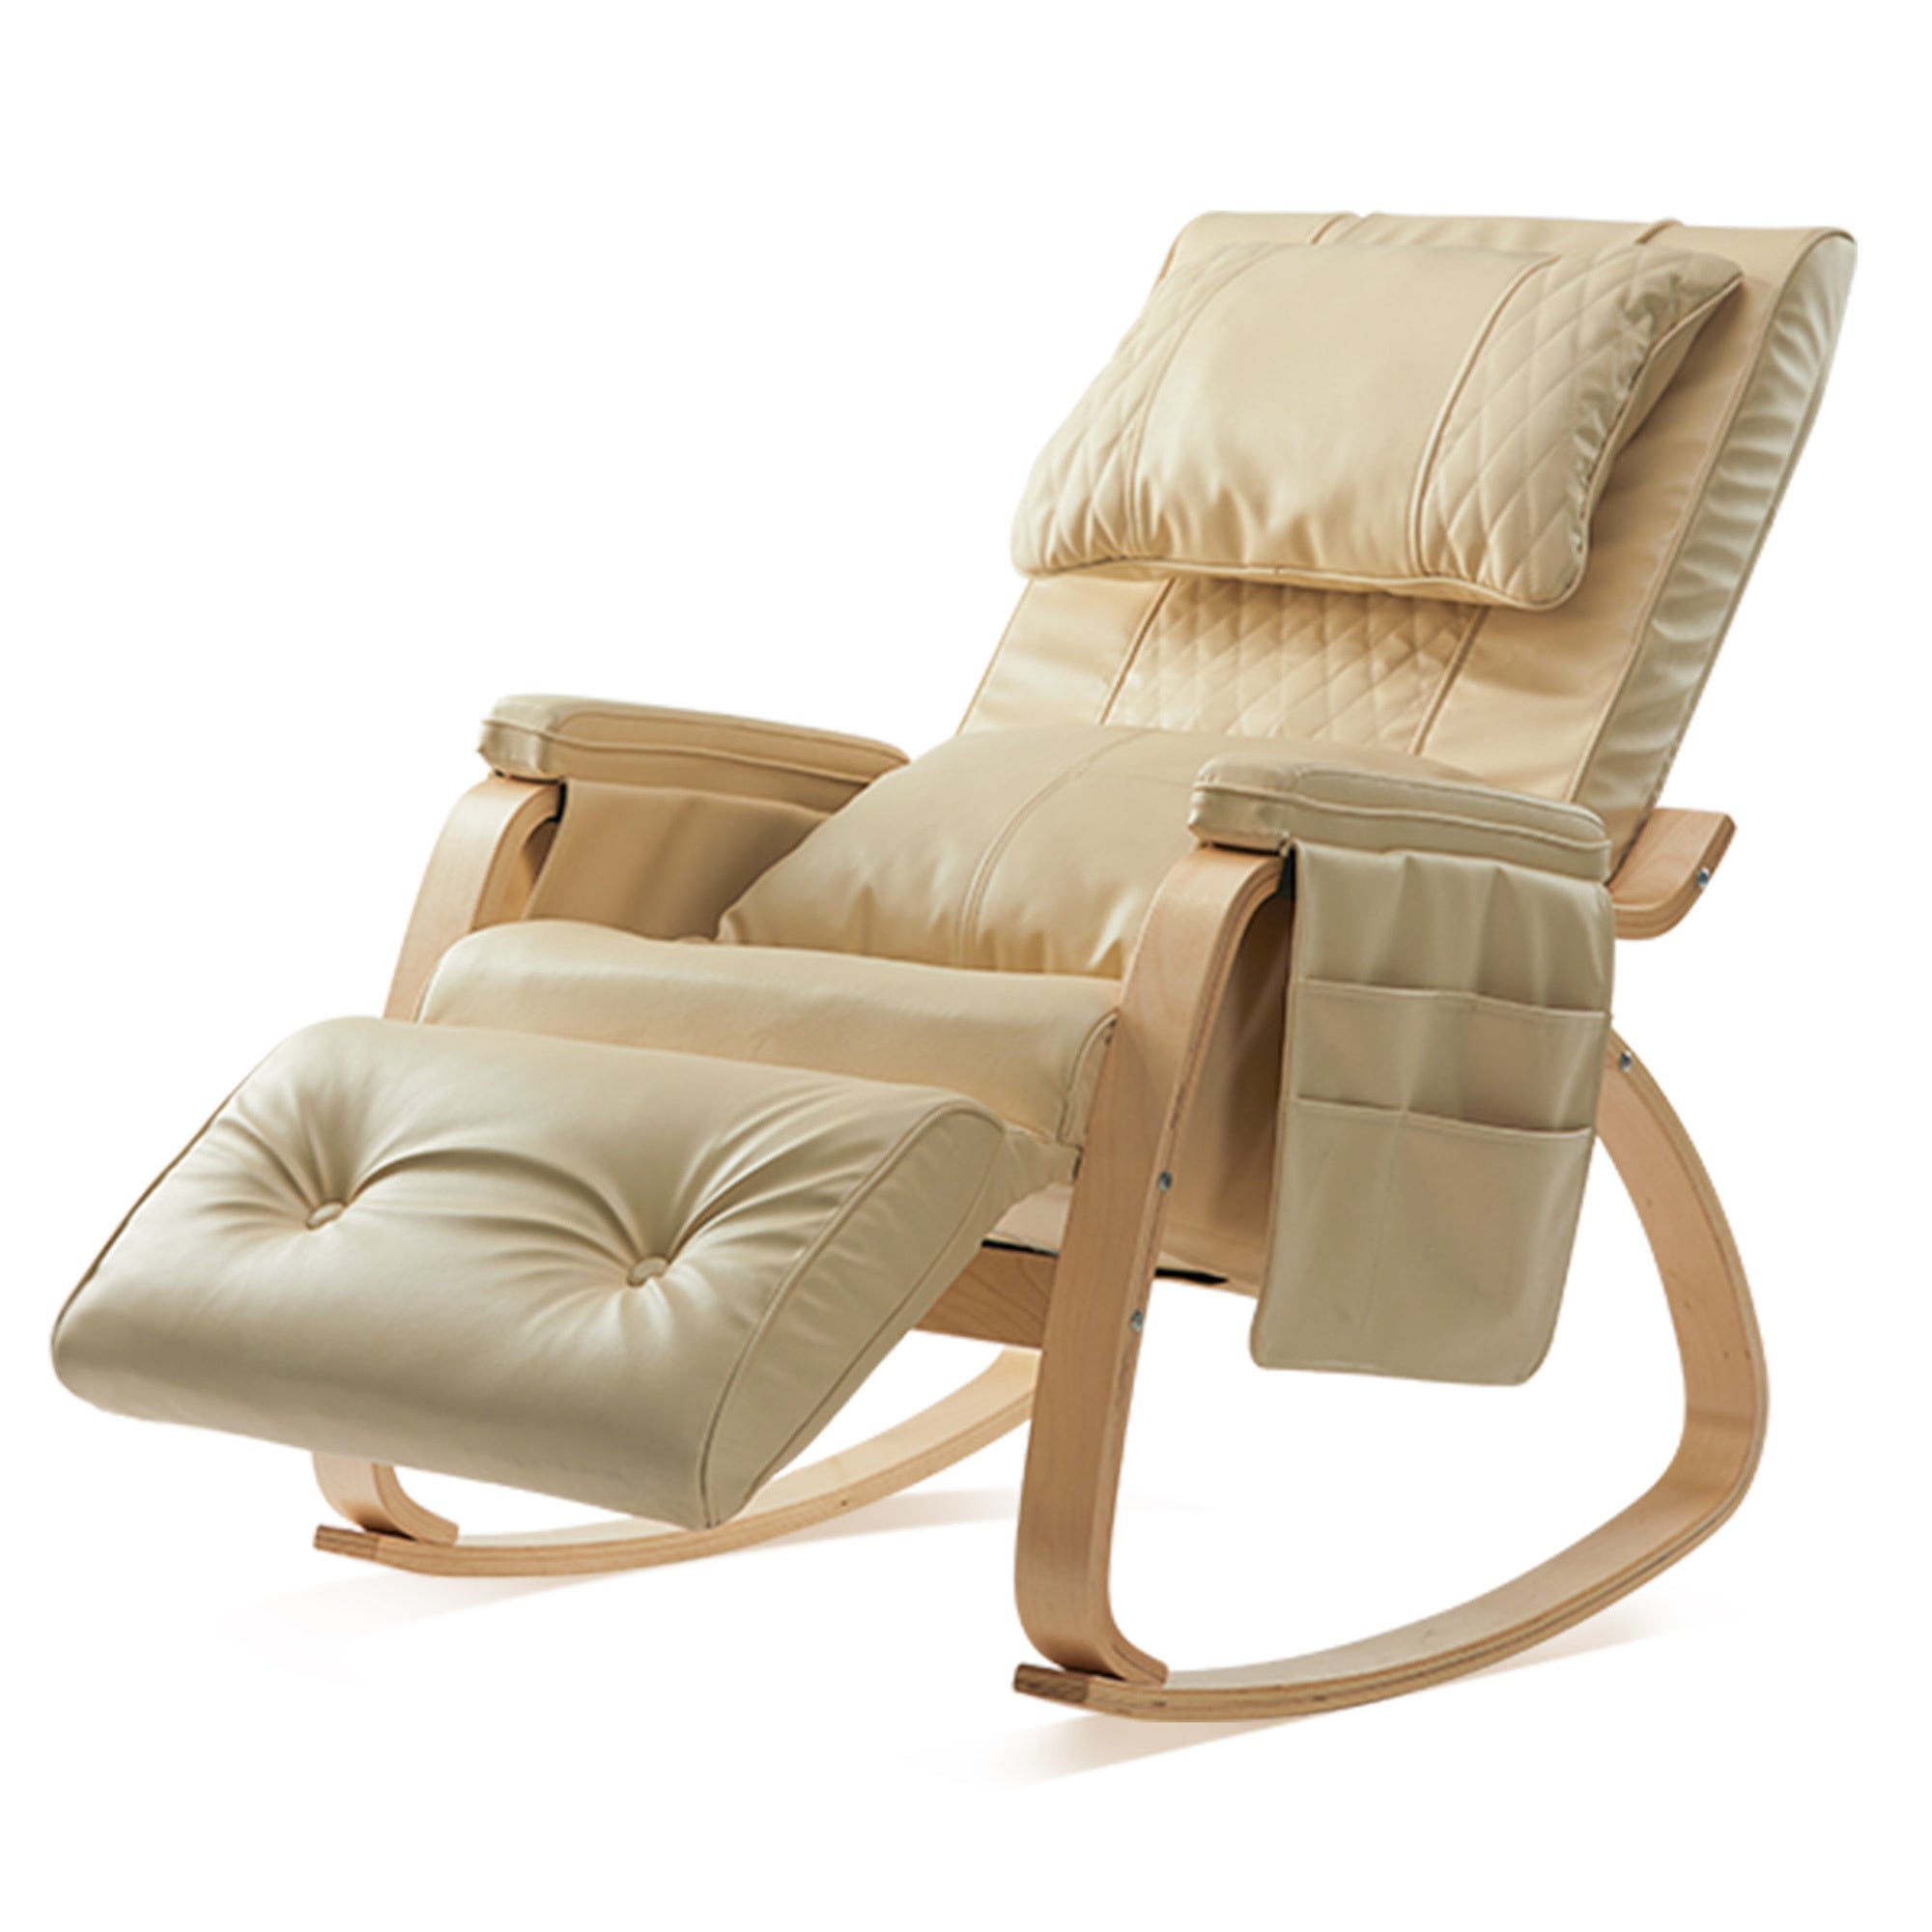 Reclining Cream White Leather Rocking Chair